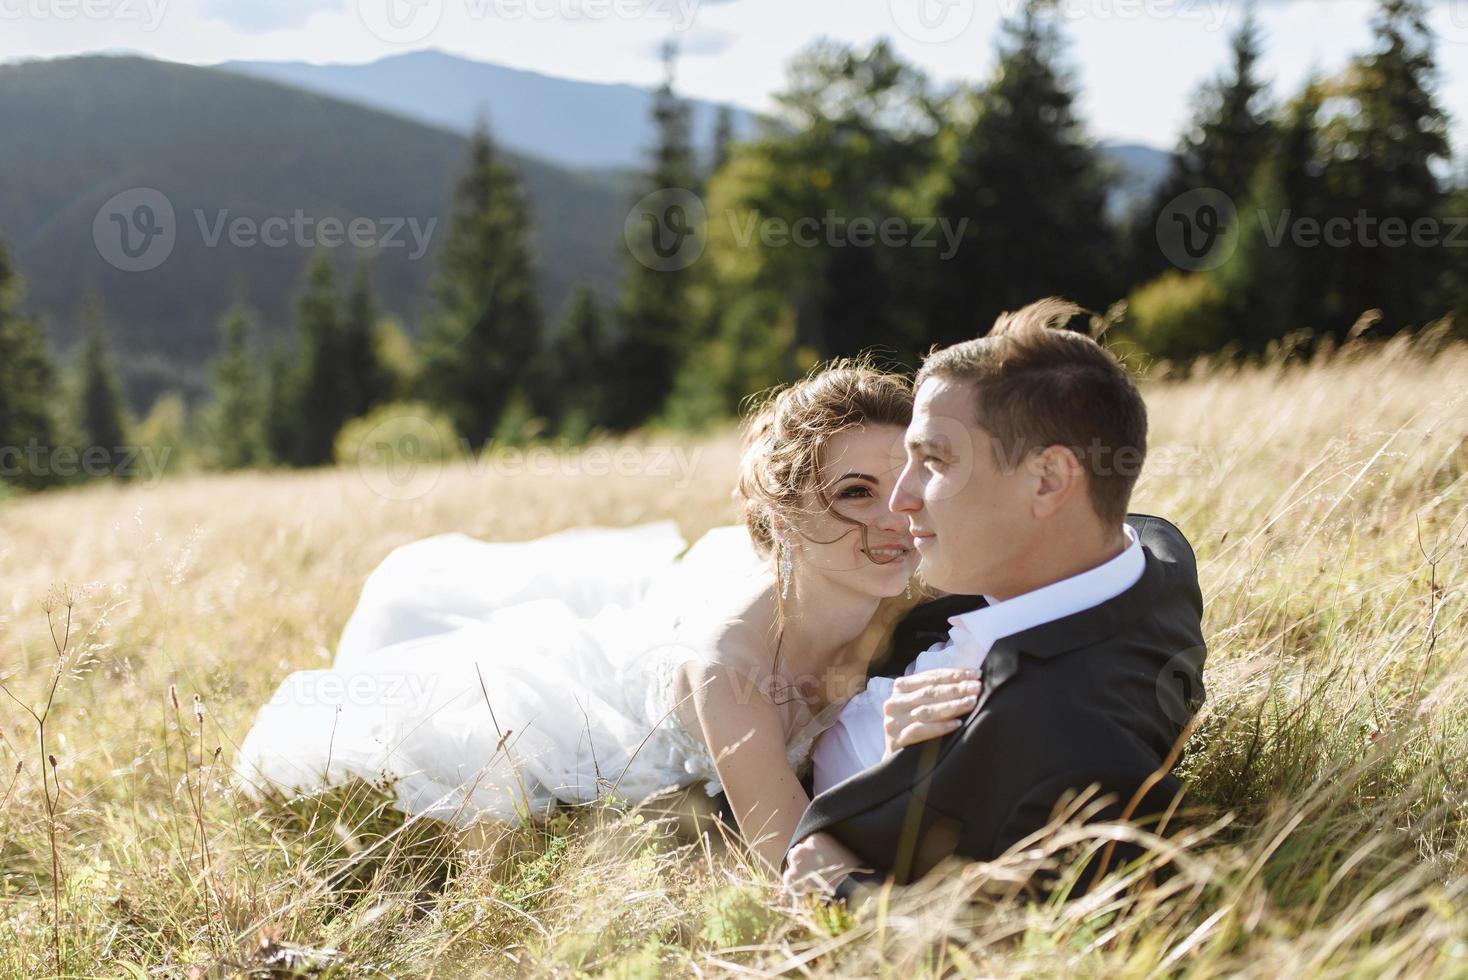 Beautiful bride and groom at the mountains photo